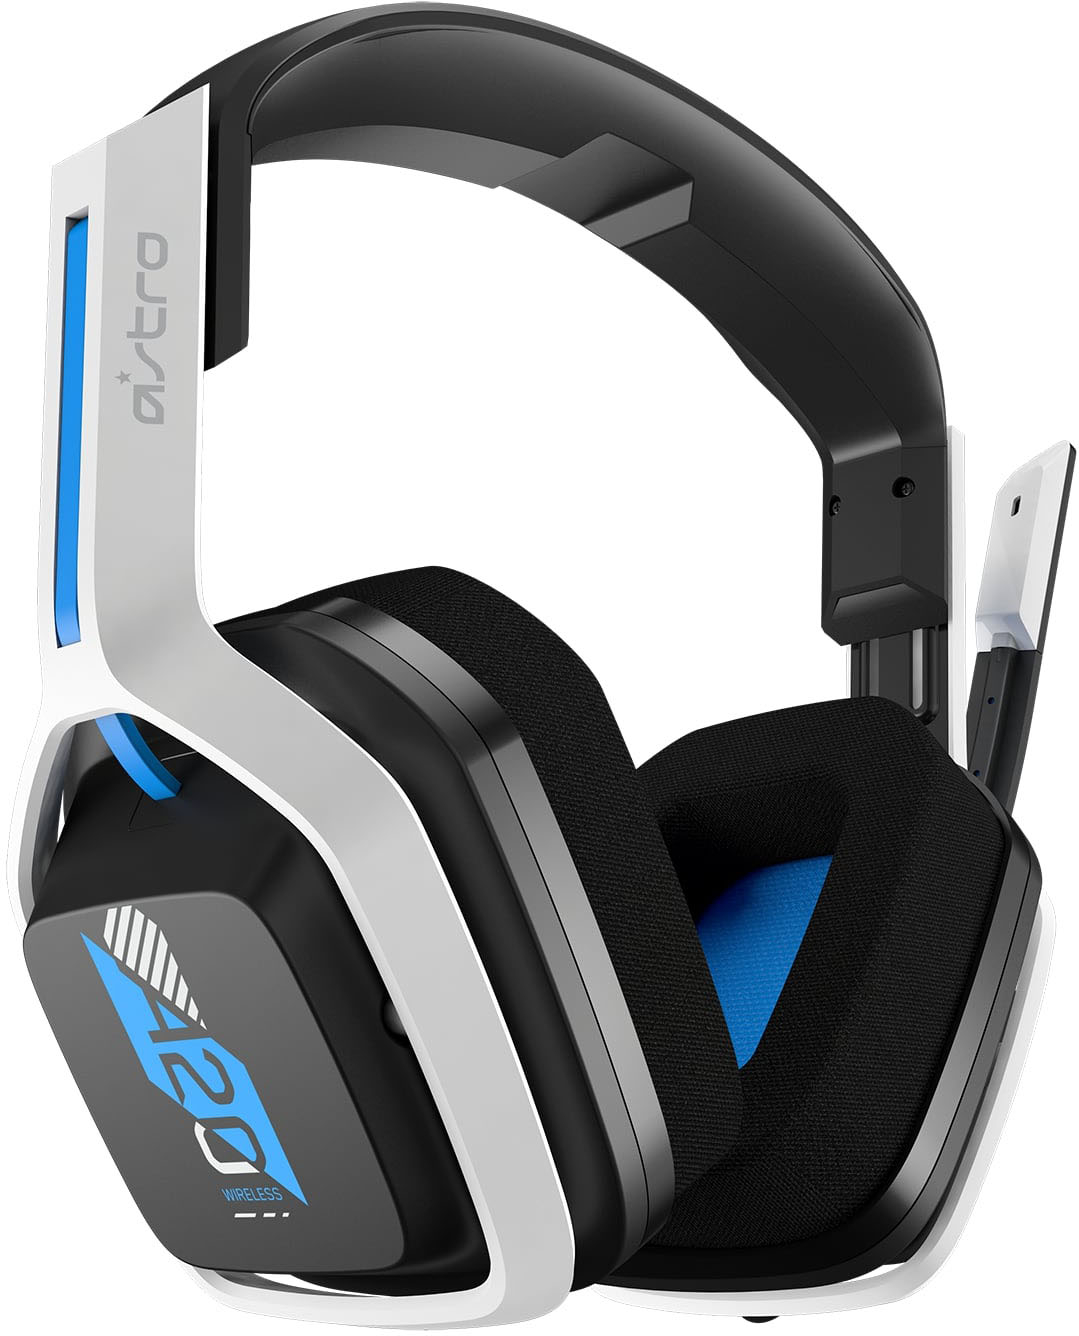 a20 ps4 headset